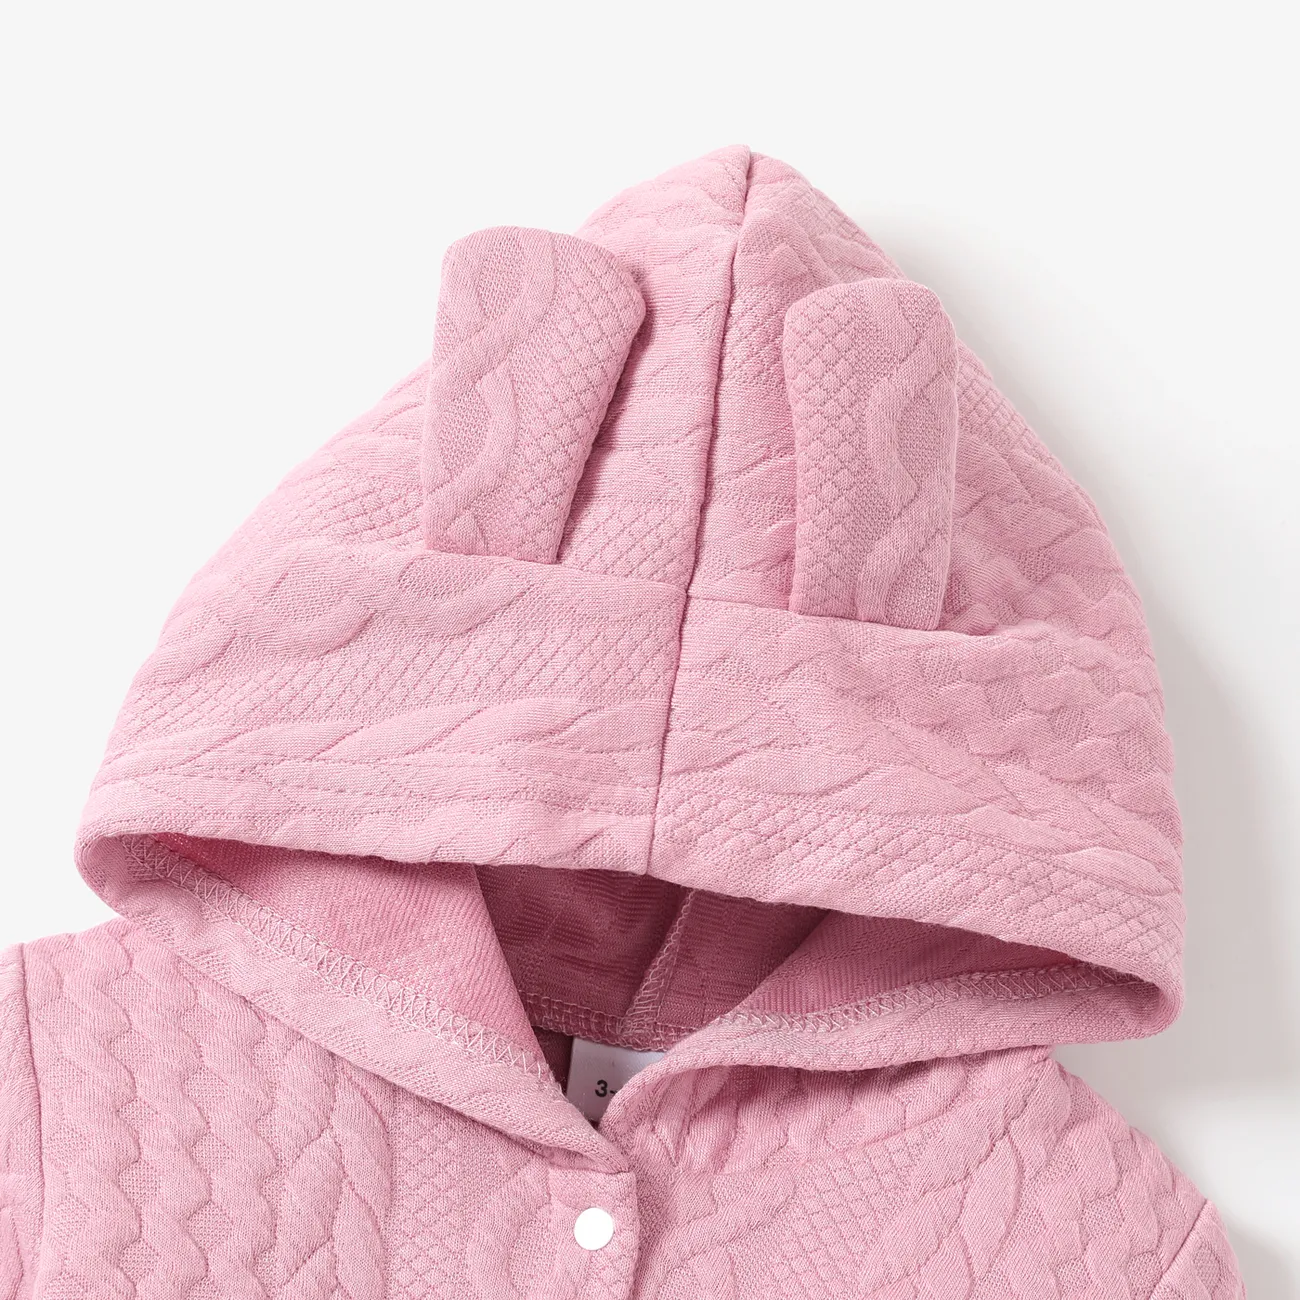 Solid Knitted Hooded Long-sleeve Pink Baby Jumpsuit Pink big image 1